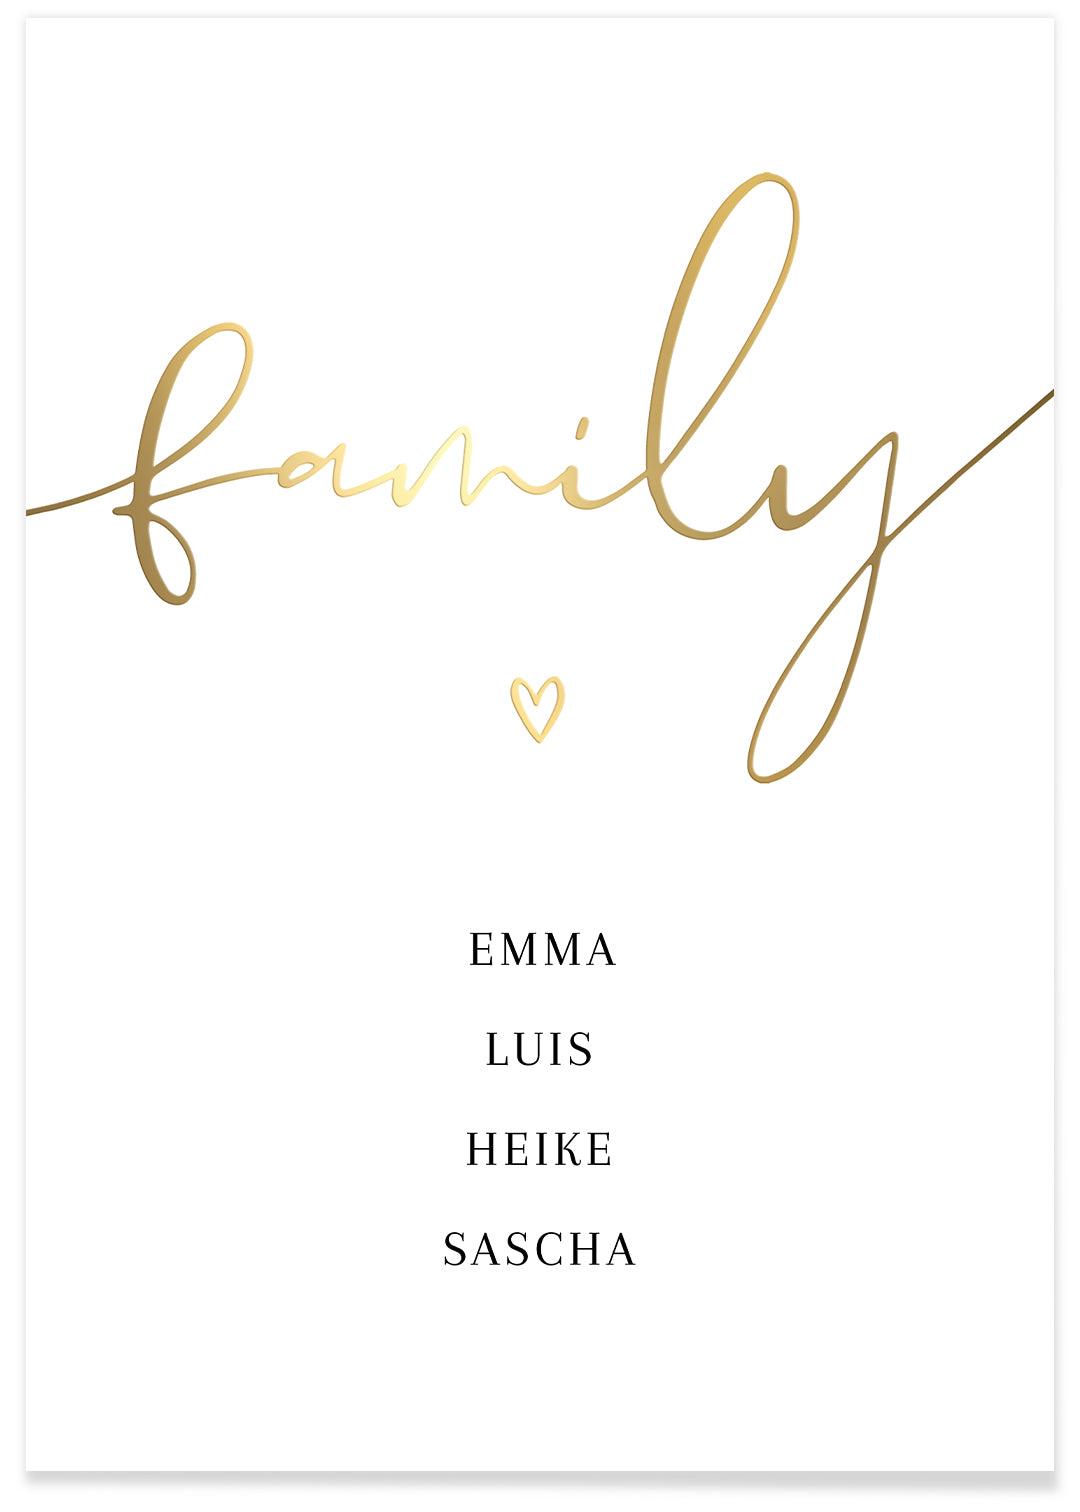 Poster "Family" with gold lettering